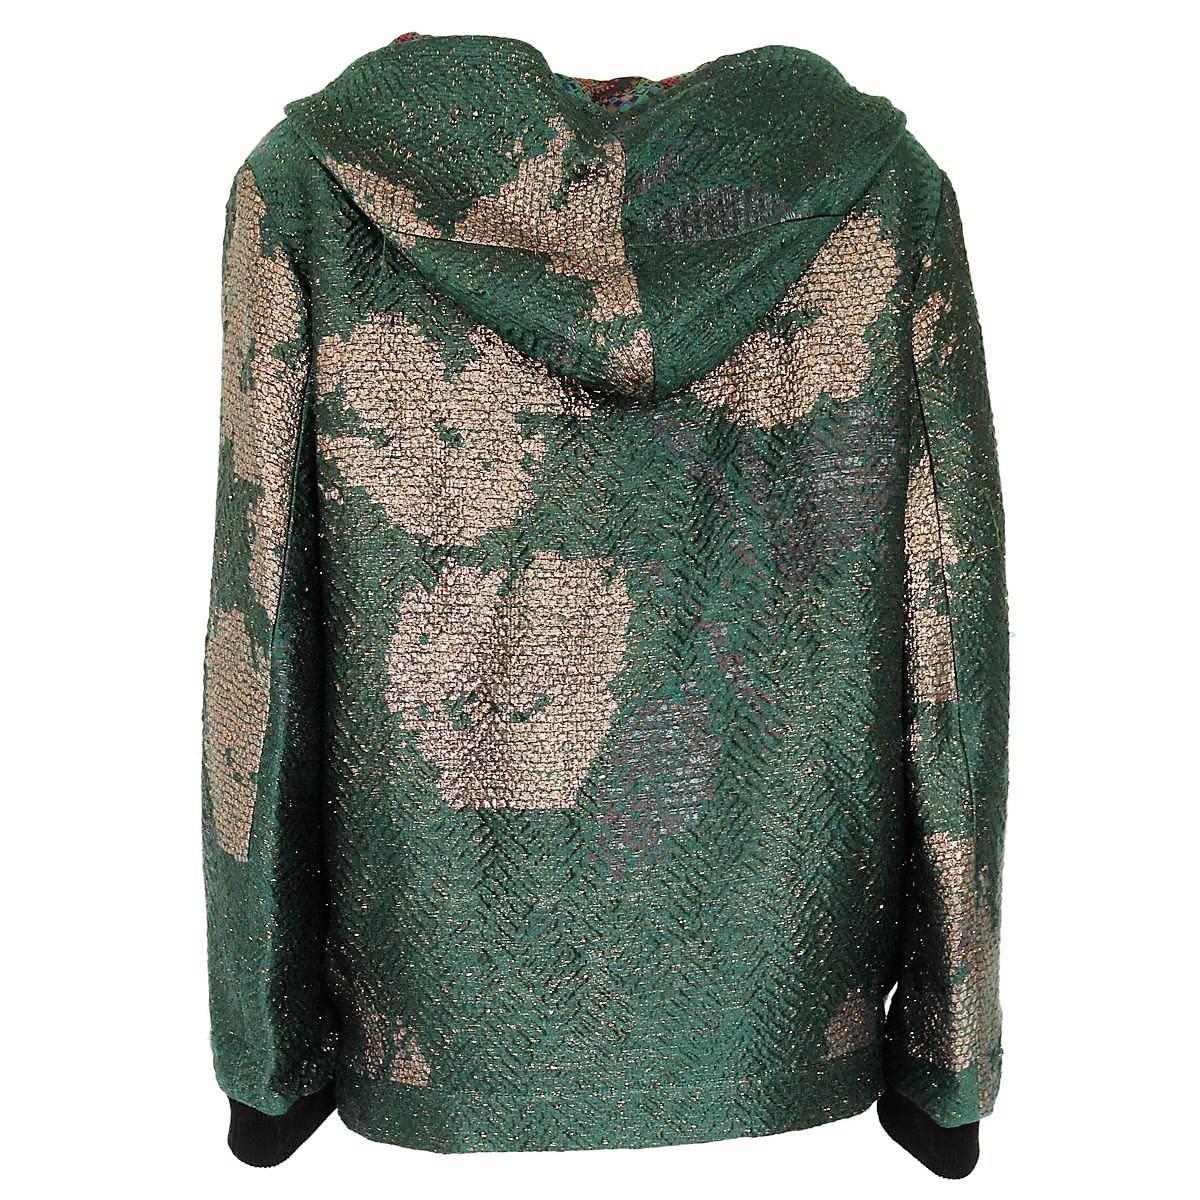 Reversible bomber
Mixed textile (40% linen)
Green and gold in one side
Green and bordeaux fancy pattern on the other
Embossed textile
Two pockets for each side
Zipl closure
With hood
Length from shoulder cm 62 (24.4 inches)
Original price €